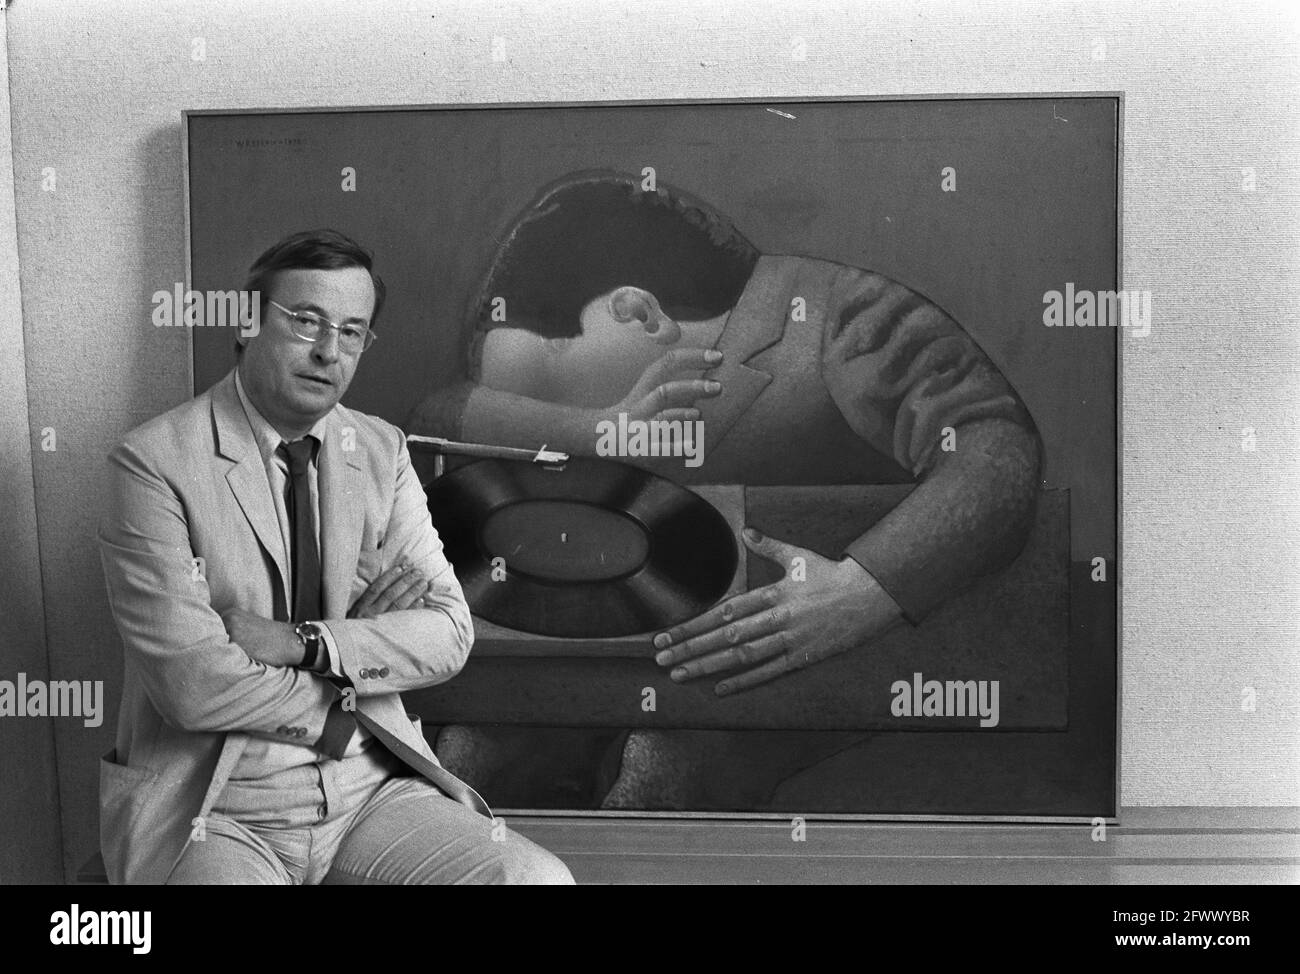 Assignment Volkskrant, painter Co Westerik for own work in Stedelijk Museum, Amsterdam, 21 September 1971, Museums, painters, The Netherlands, 20th century press agency photo, news to remember, documentary, historic photography 1945-1990, visual stories, human history of the Twentieth Century, capturing moments in time Stock Photo